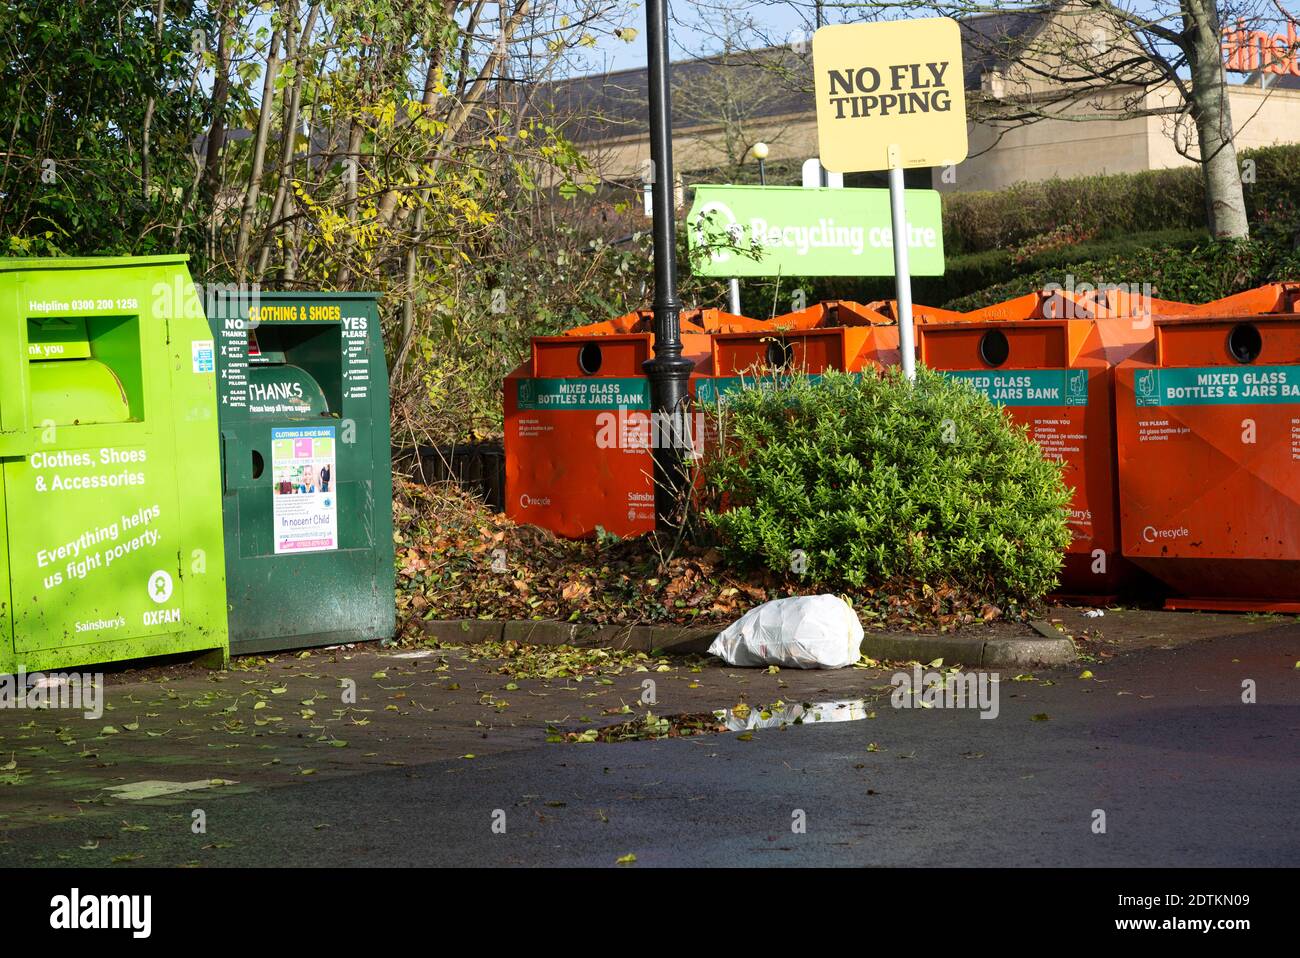 Rubbish bag dumped beneath No Fly Tipping sign, Sainsbury's recycling centre, Calne, England Stock Photo